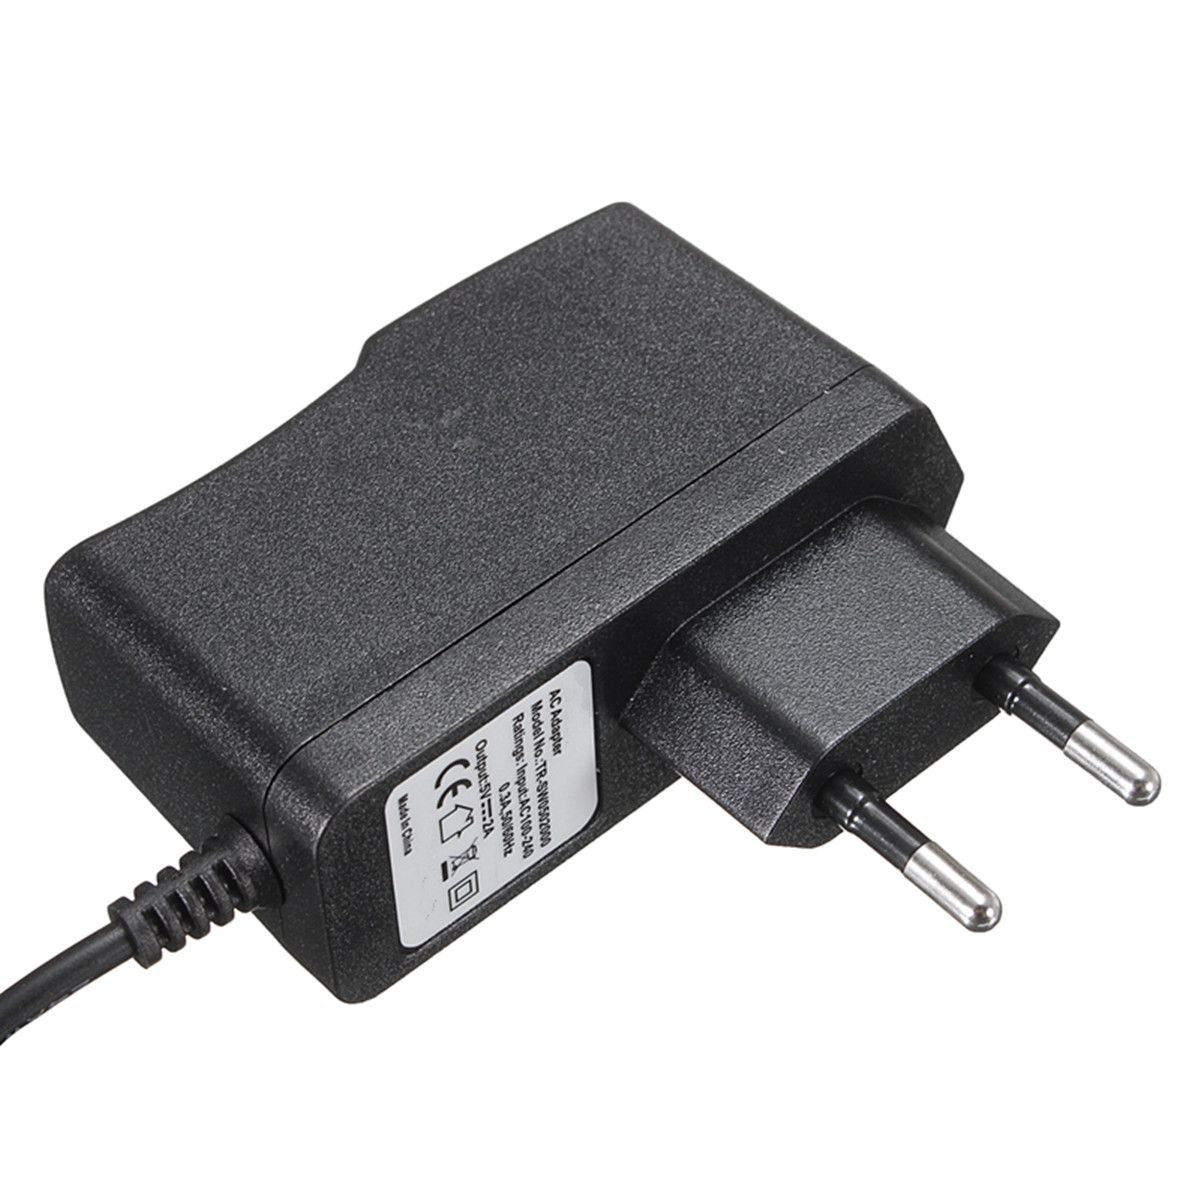 NES-Classic-Mini-AC-Charger-Adapter-for-Nintendo-Classic-Mini-Edition-Power-Supply-Charger-1363885-7